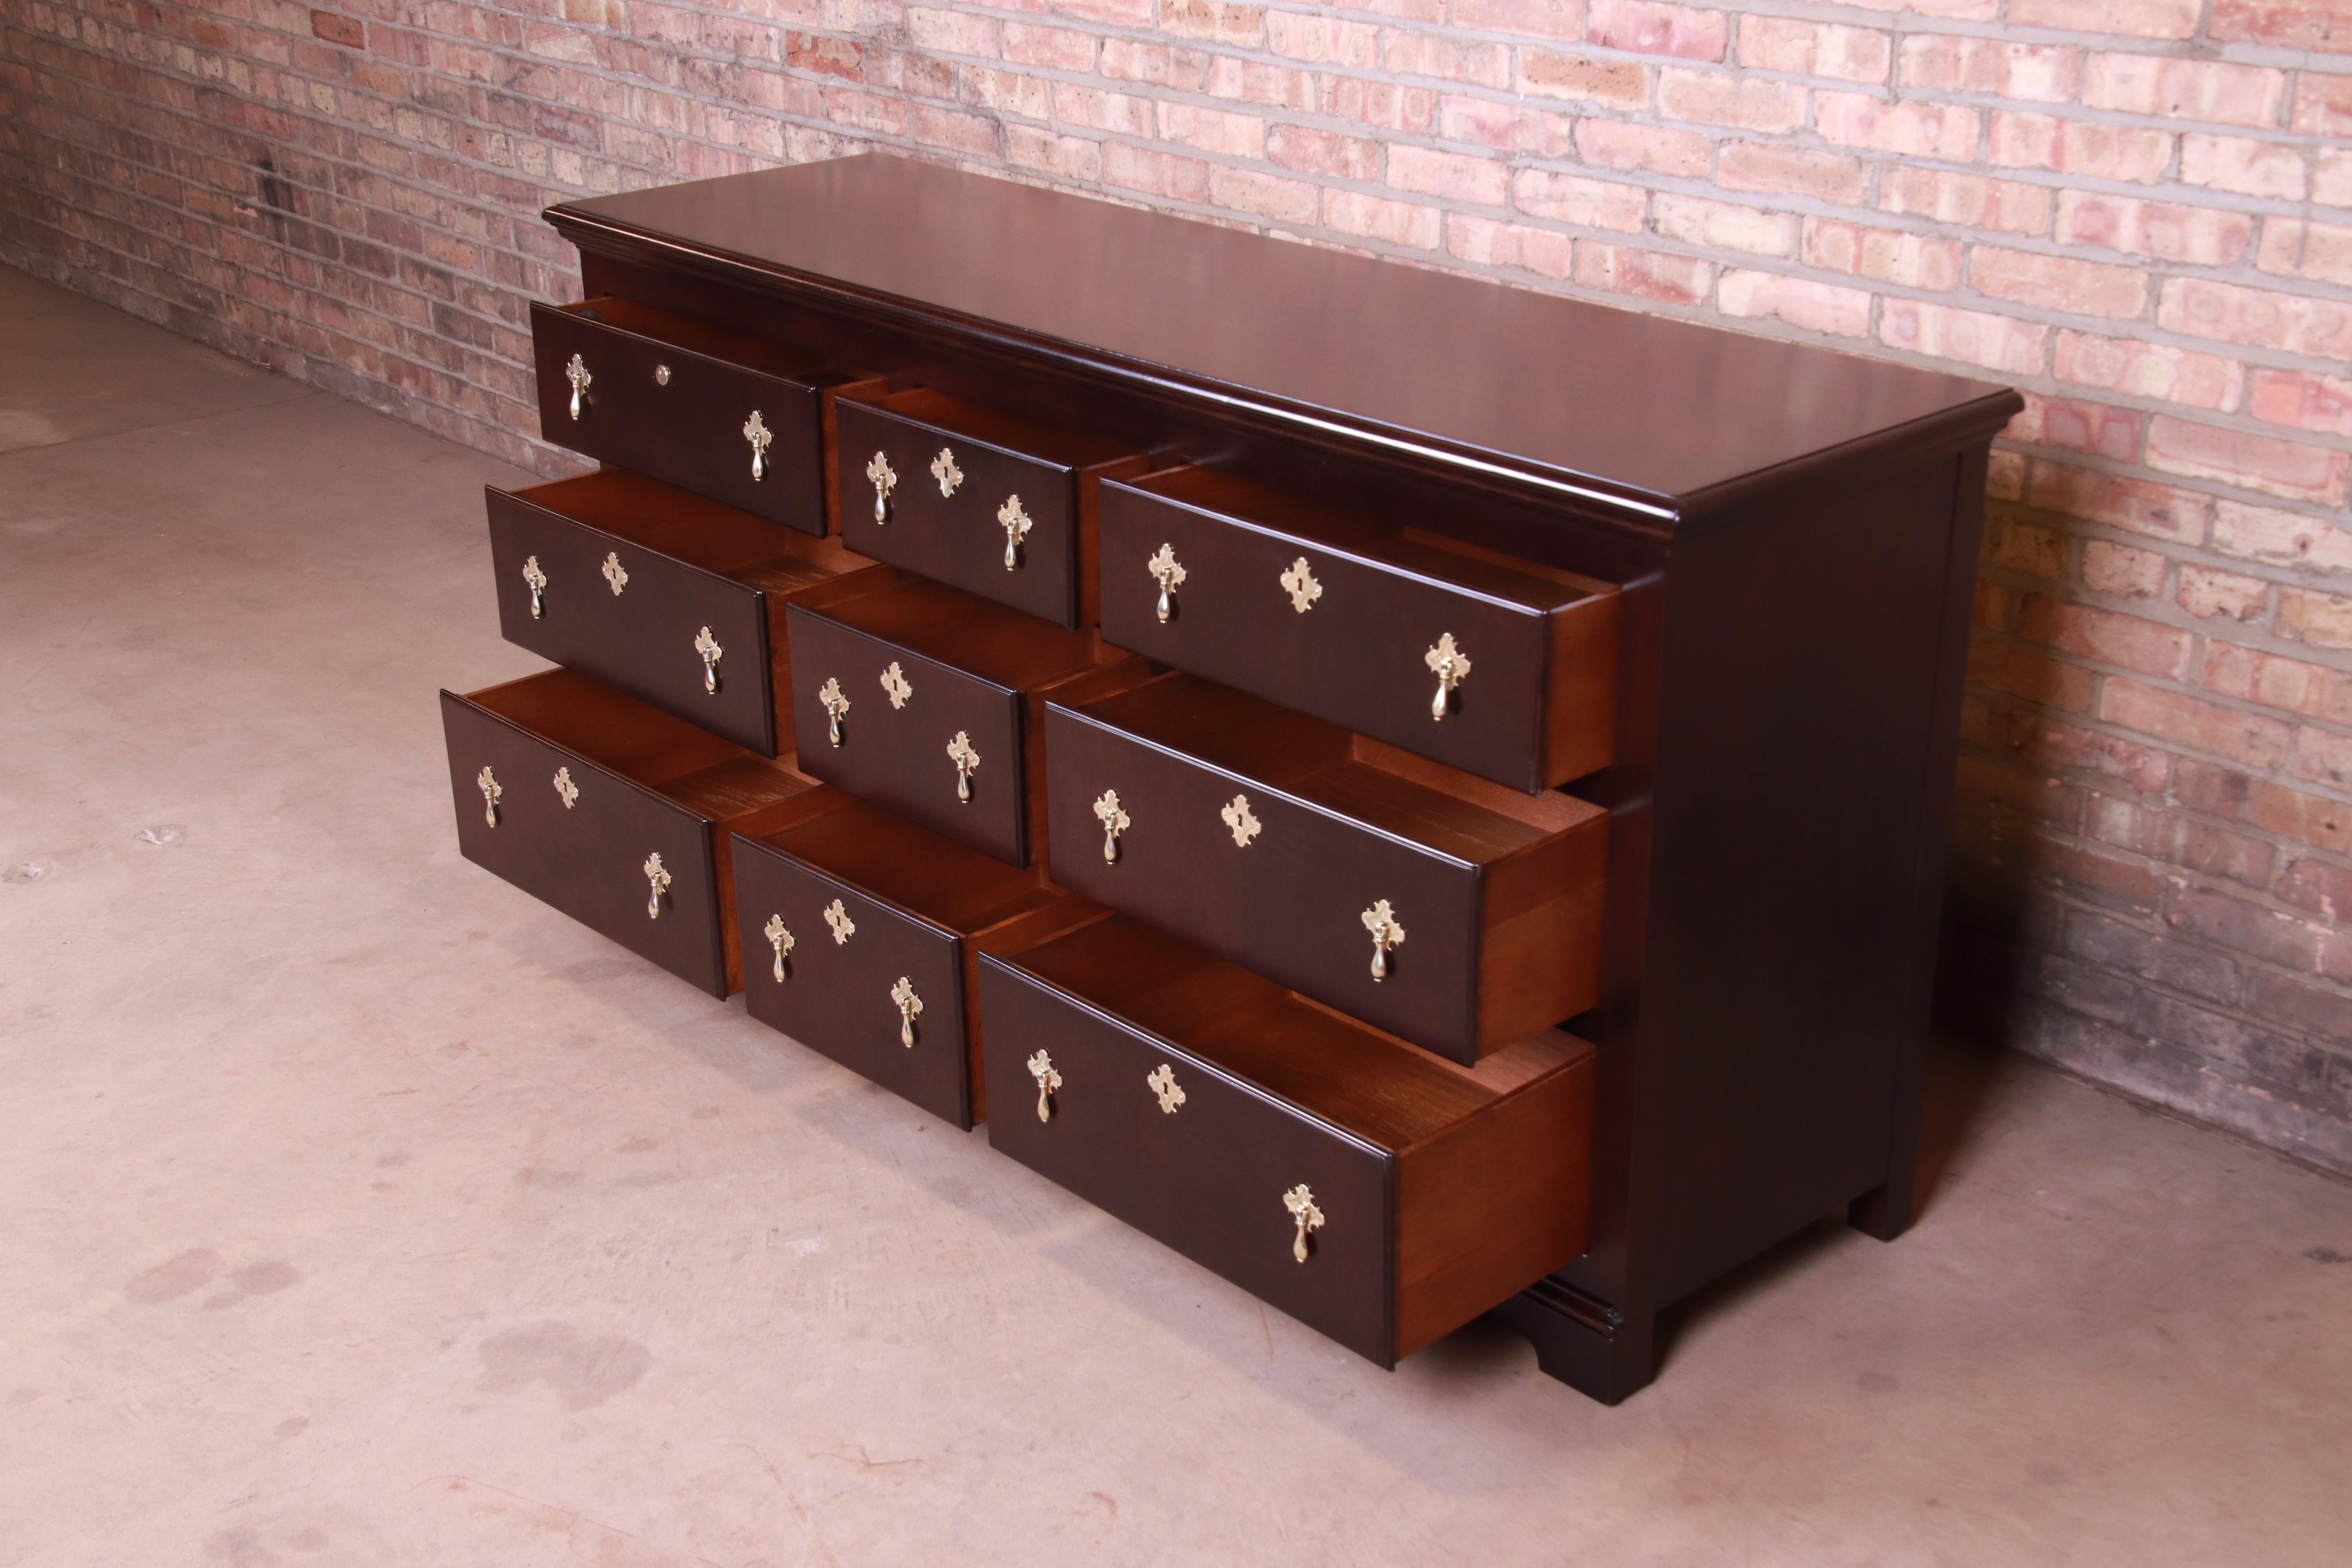 British Colonial Baker Furniture 18th Century Flemish Style Mahogany Triple Dresser, Refinished For Sale